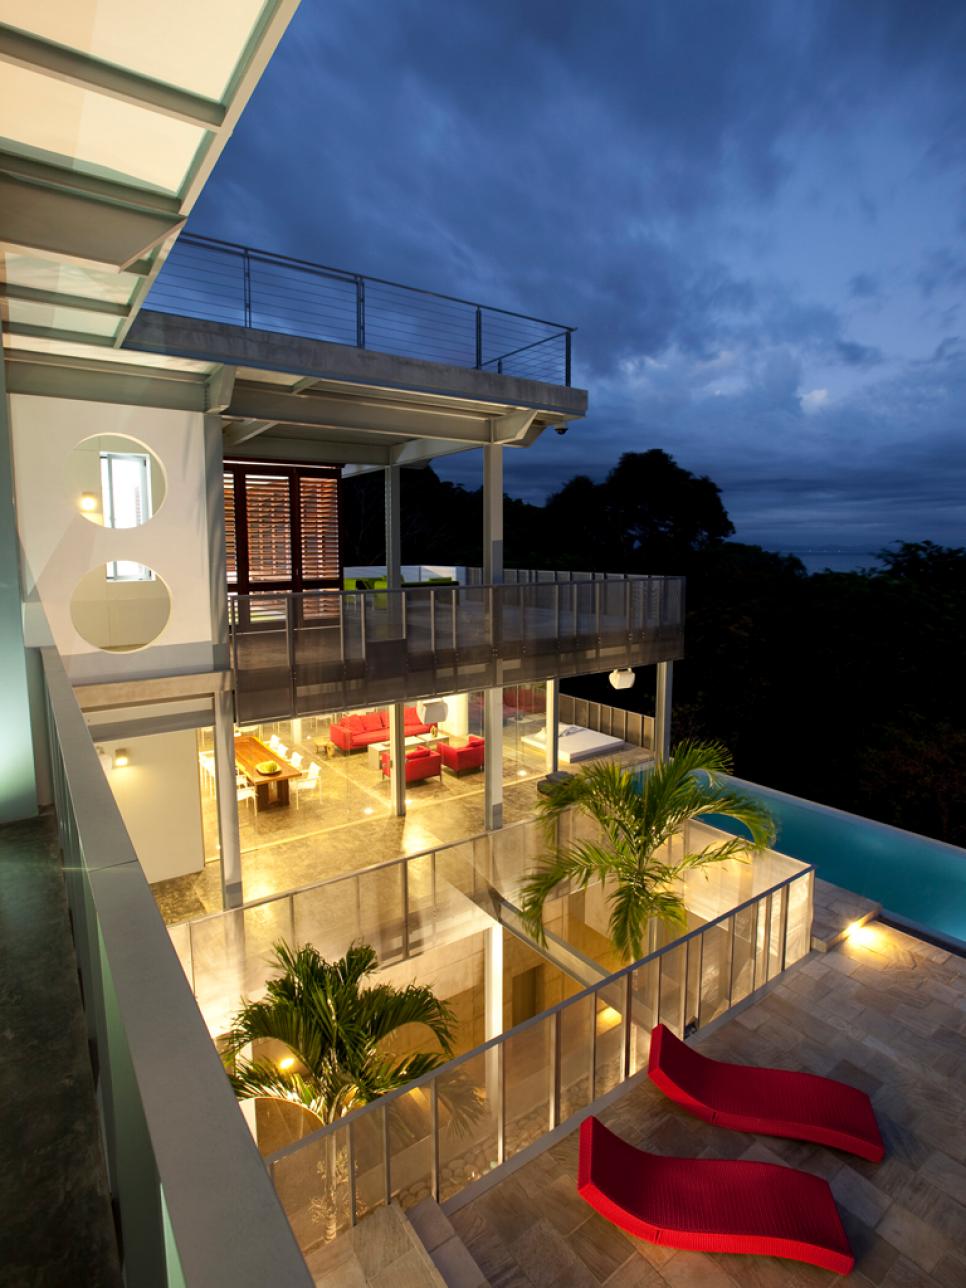 Multilevel Outdoor Living Space